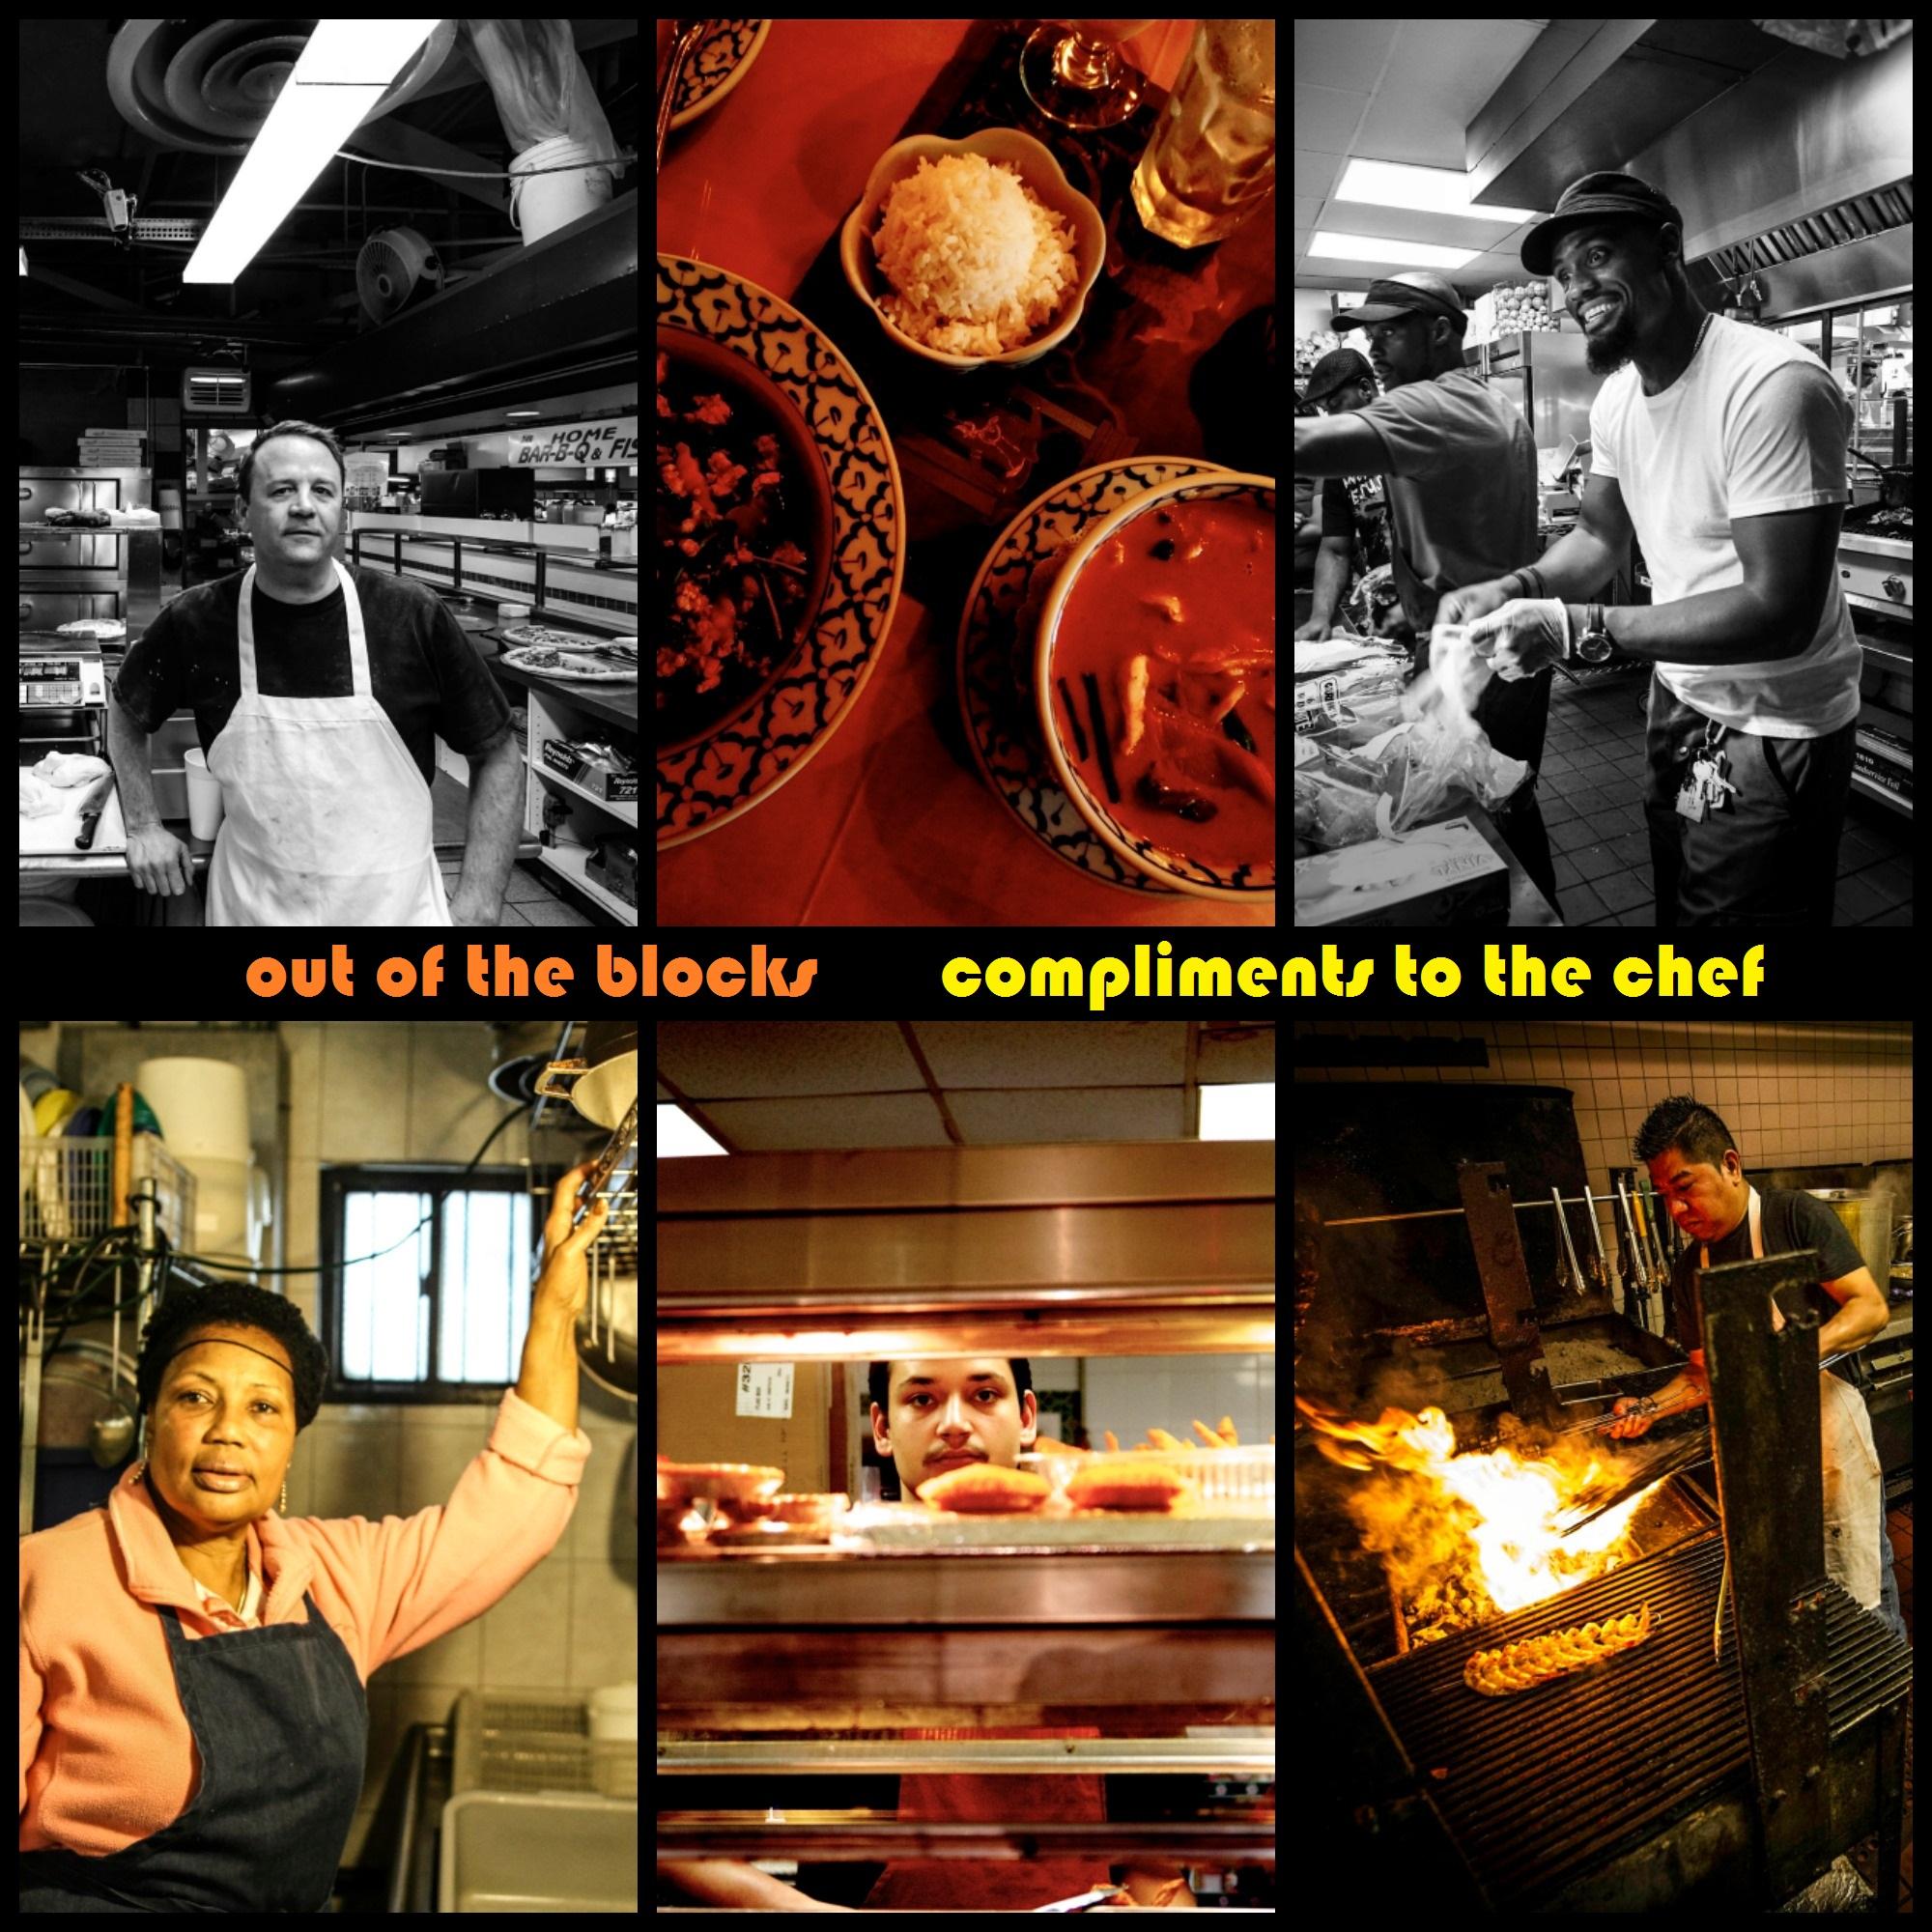 Thumbnail for "Compliments to the Chef".